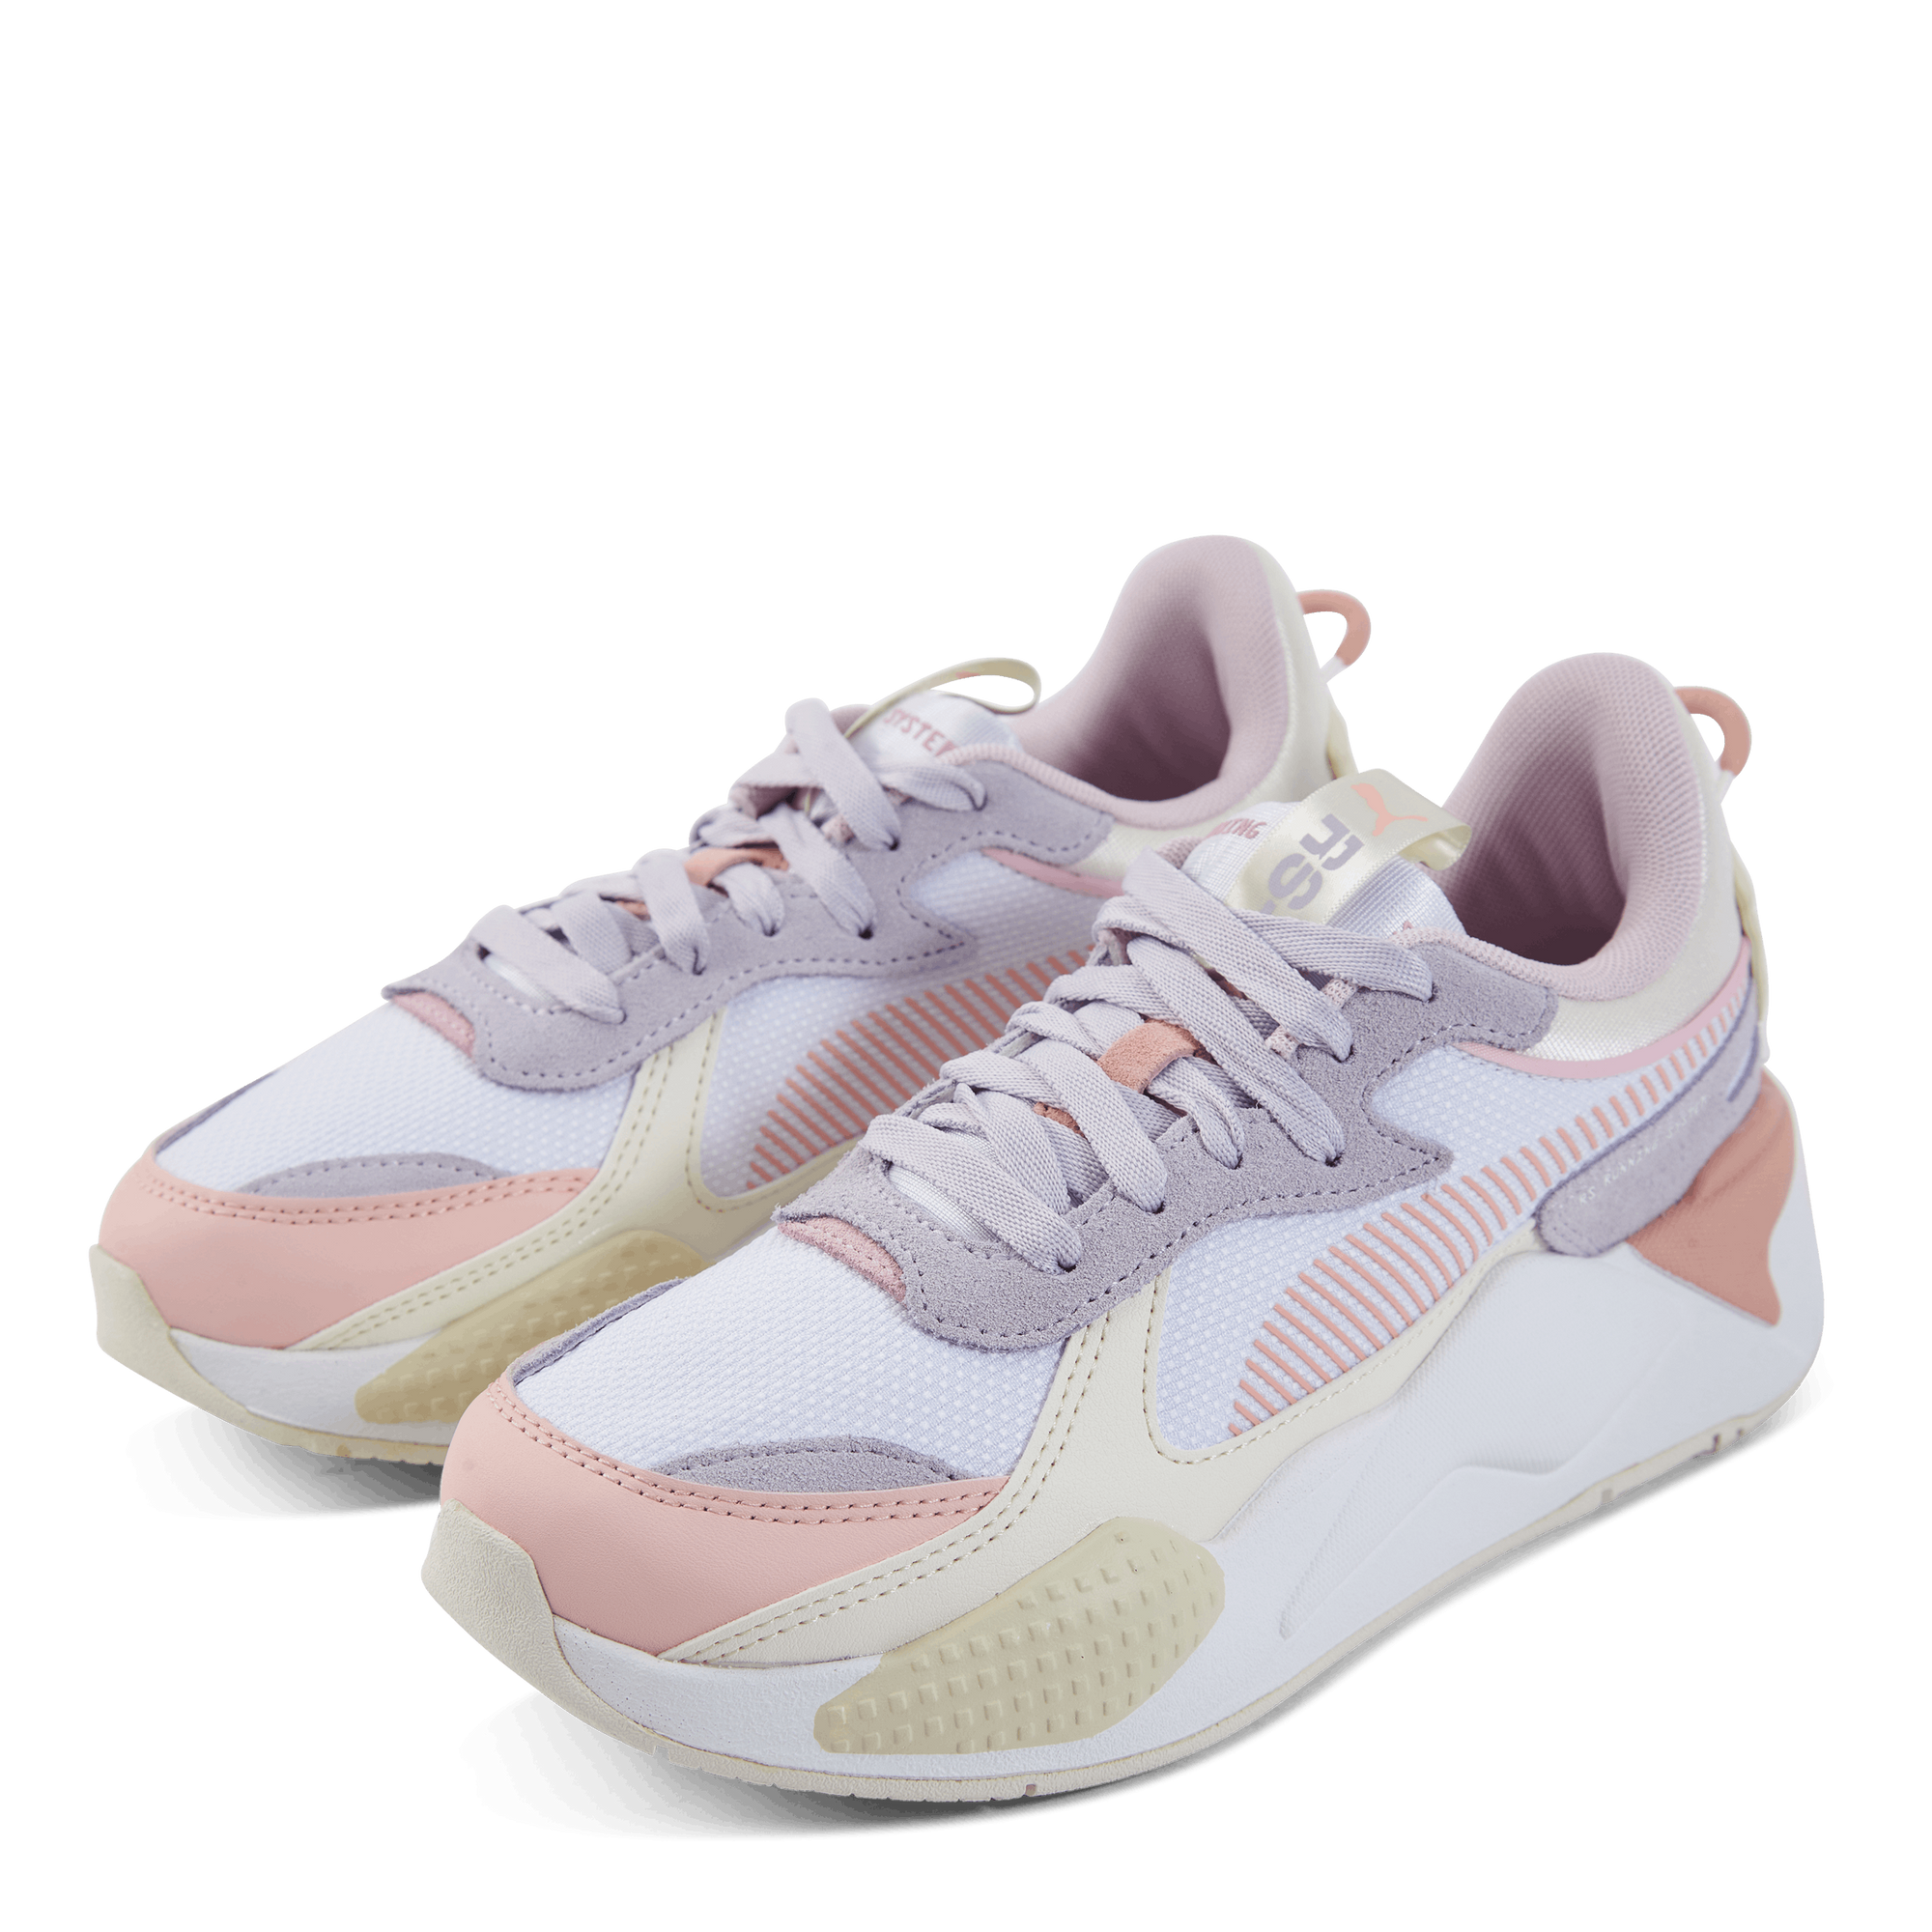 Rs-x Candy Wns White